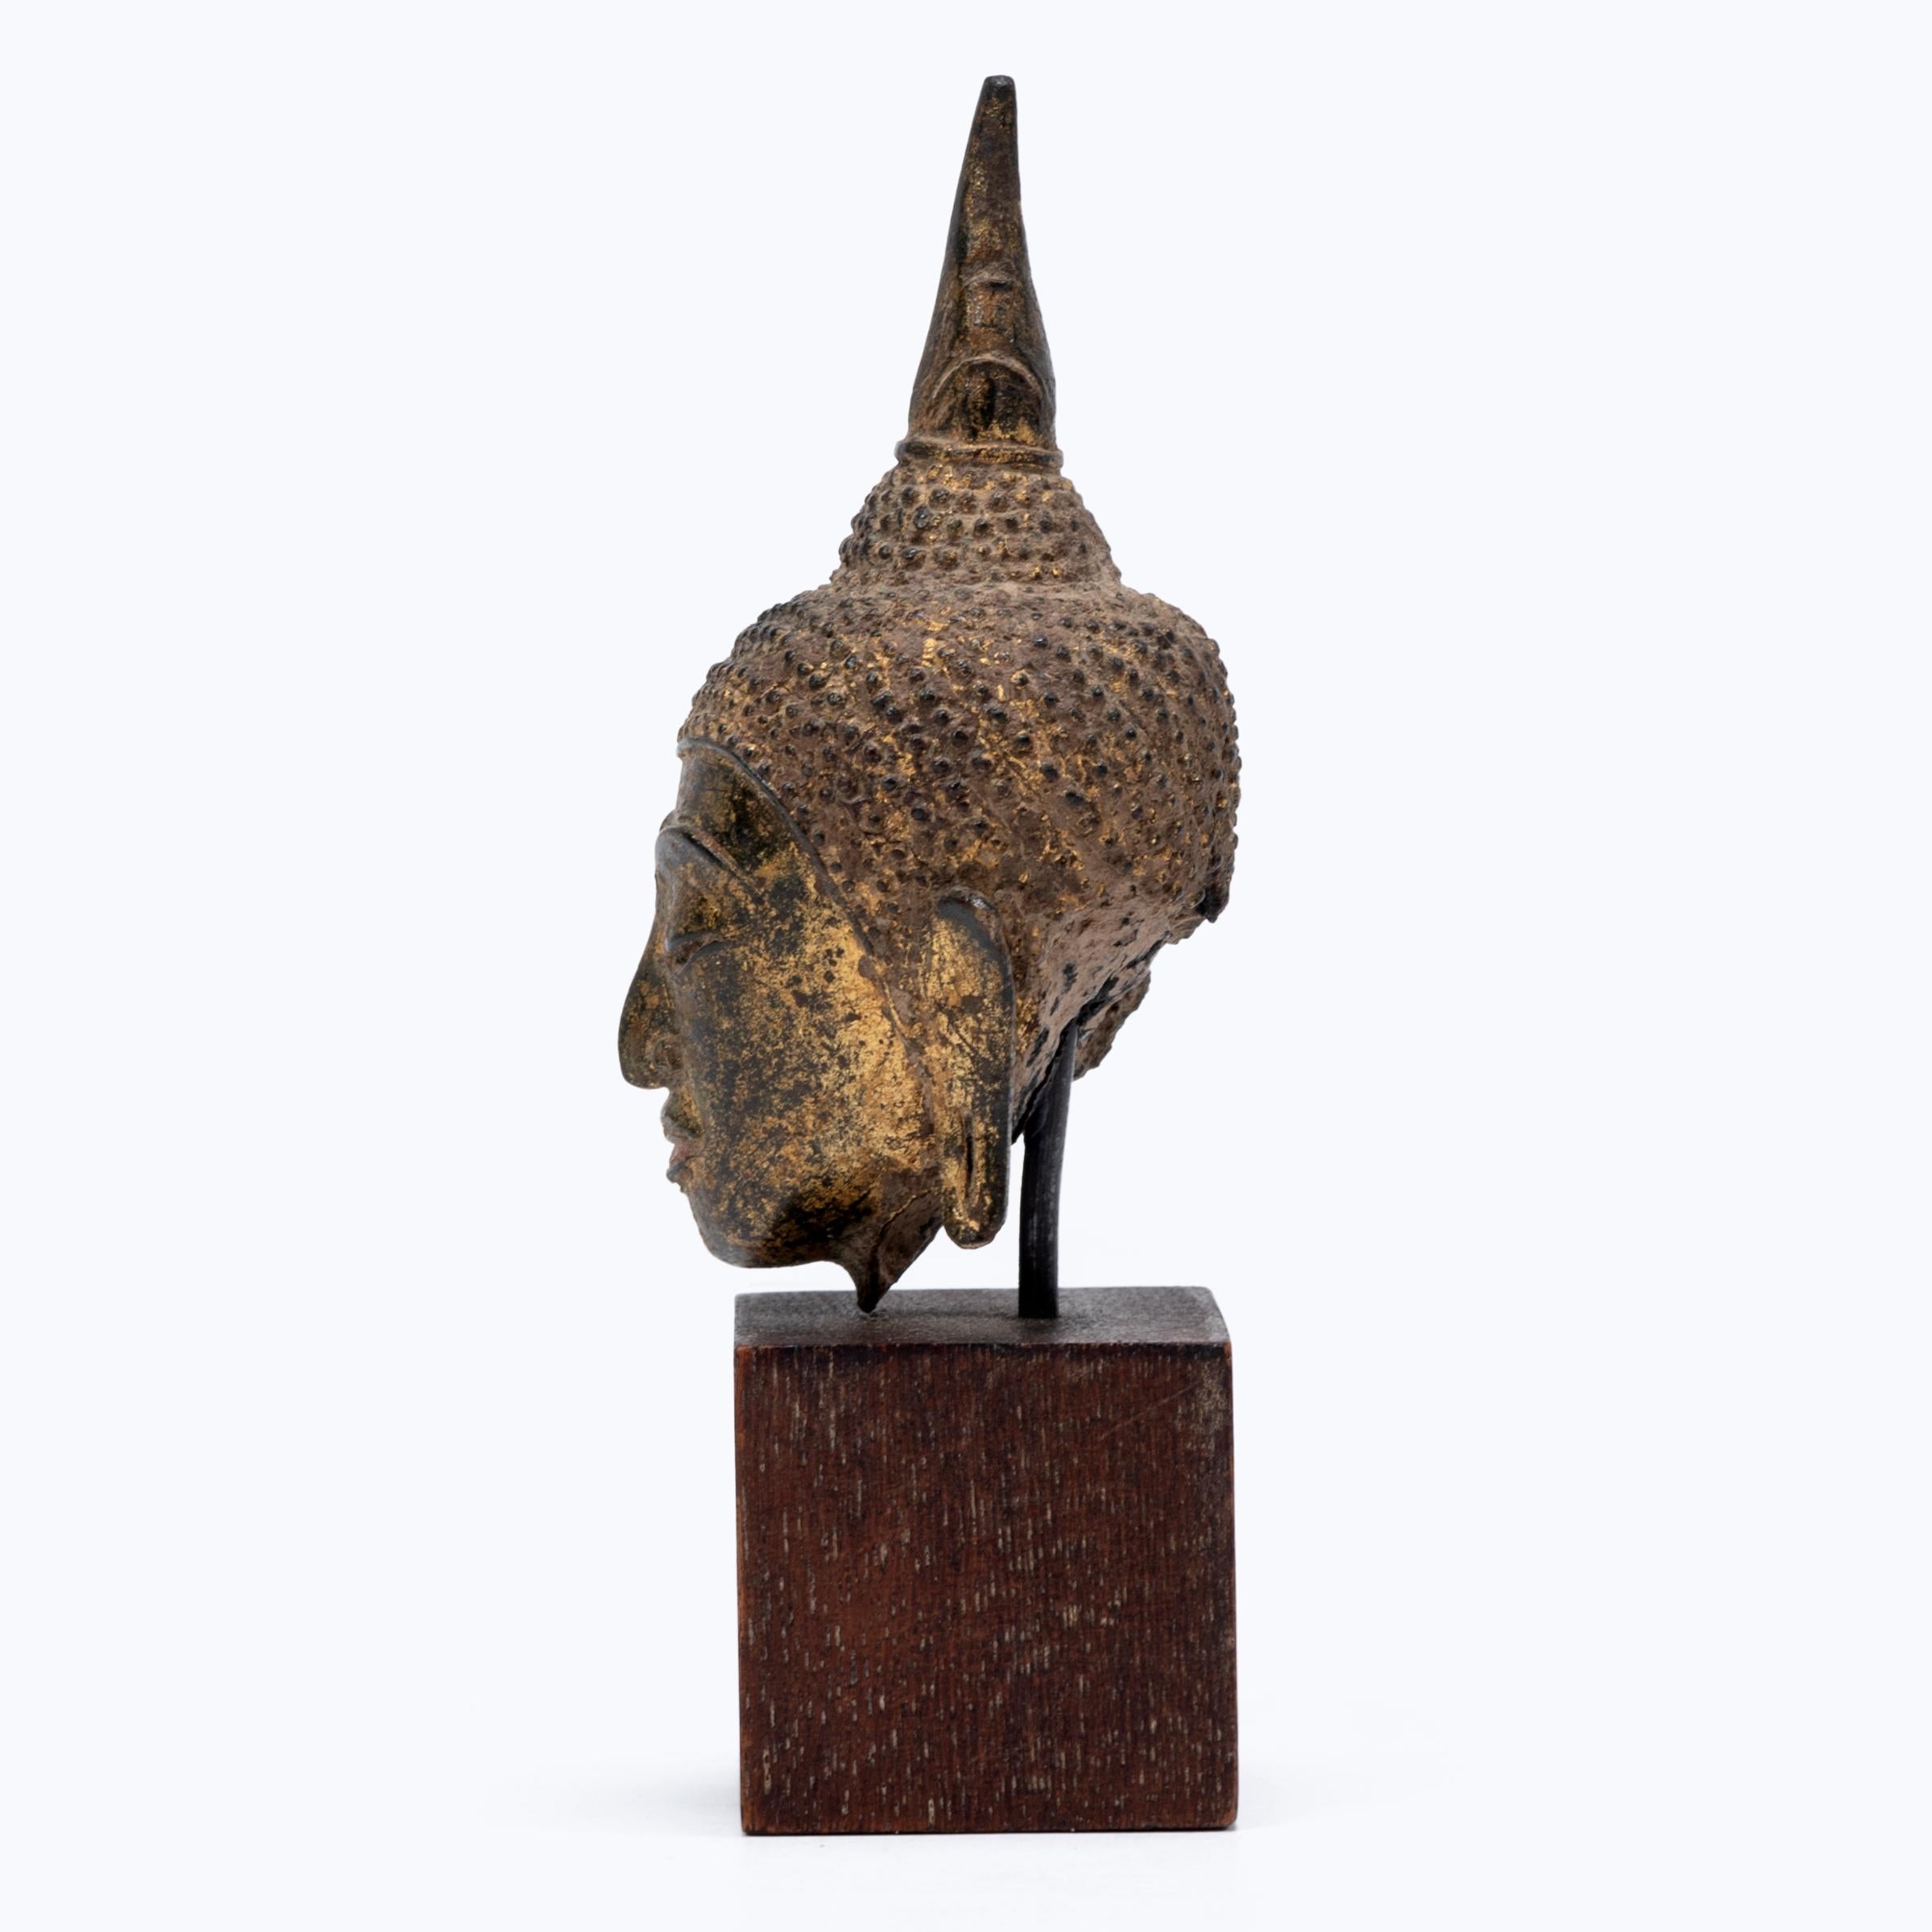 This serene Buddha head was cast of bronze in Thailand in the mid-19th century, and was originally ornately gilt and painted. Cast in the older Sukhothai style, the Buddha bears a flame-like spike stretching upward from the crown of his head. Called